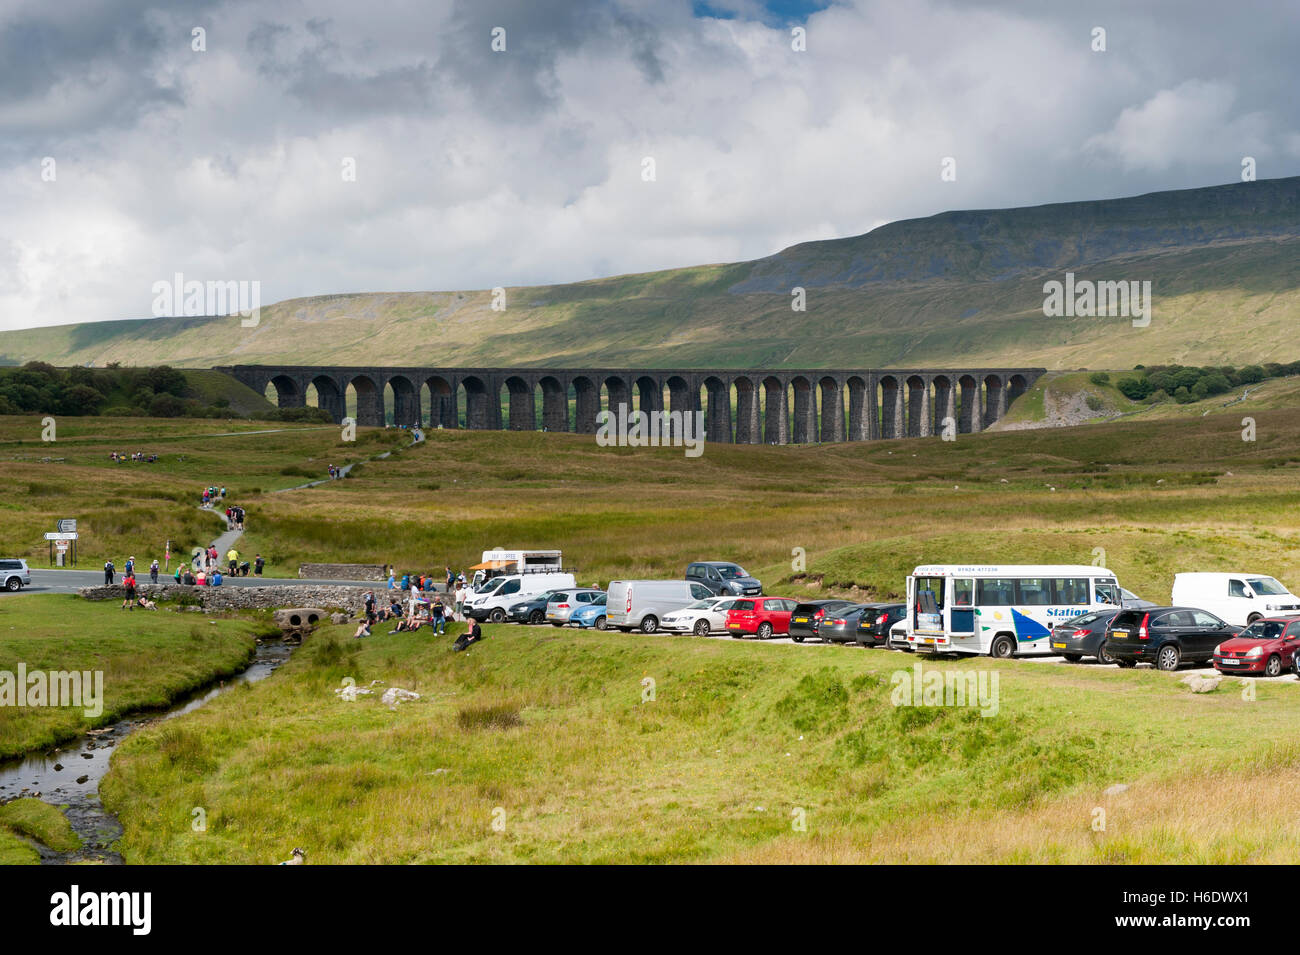 Ribblehead Viaduct on the Settle to Carlisle Railway, with lots of tourists around. Yorkshire Dales National Park, UK. Stock Photo